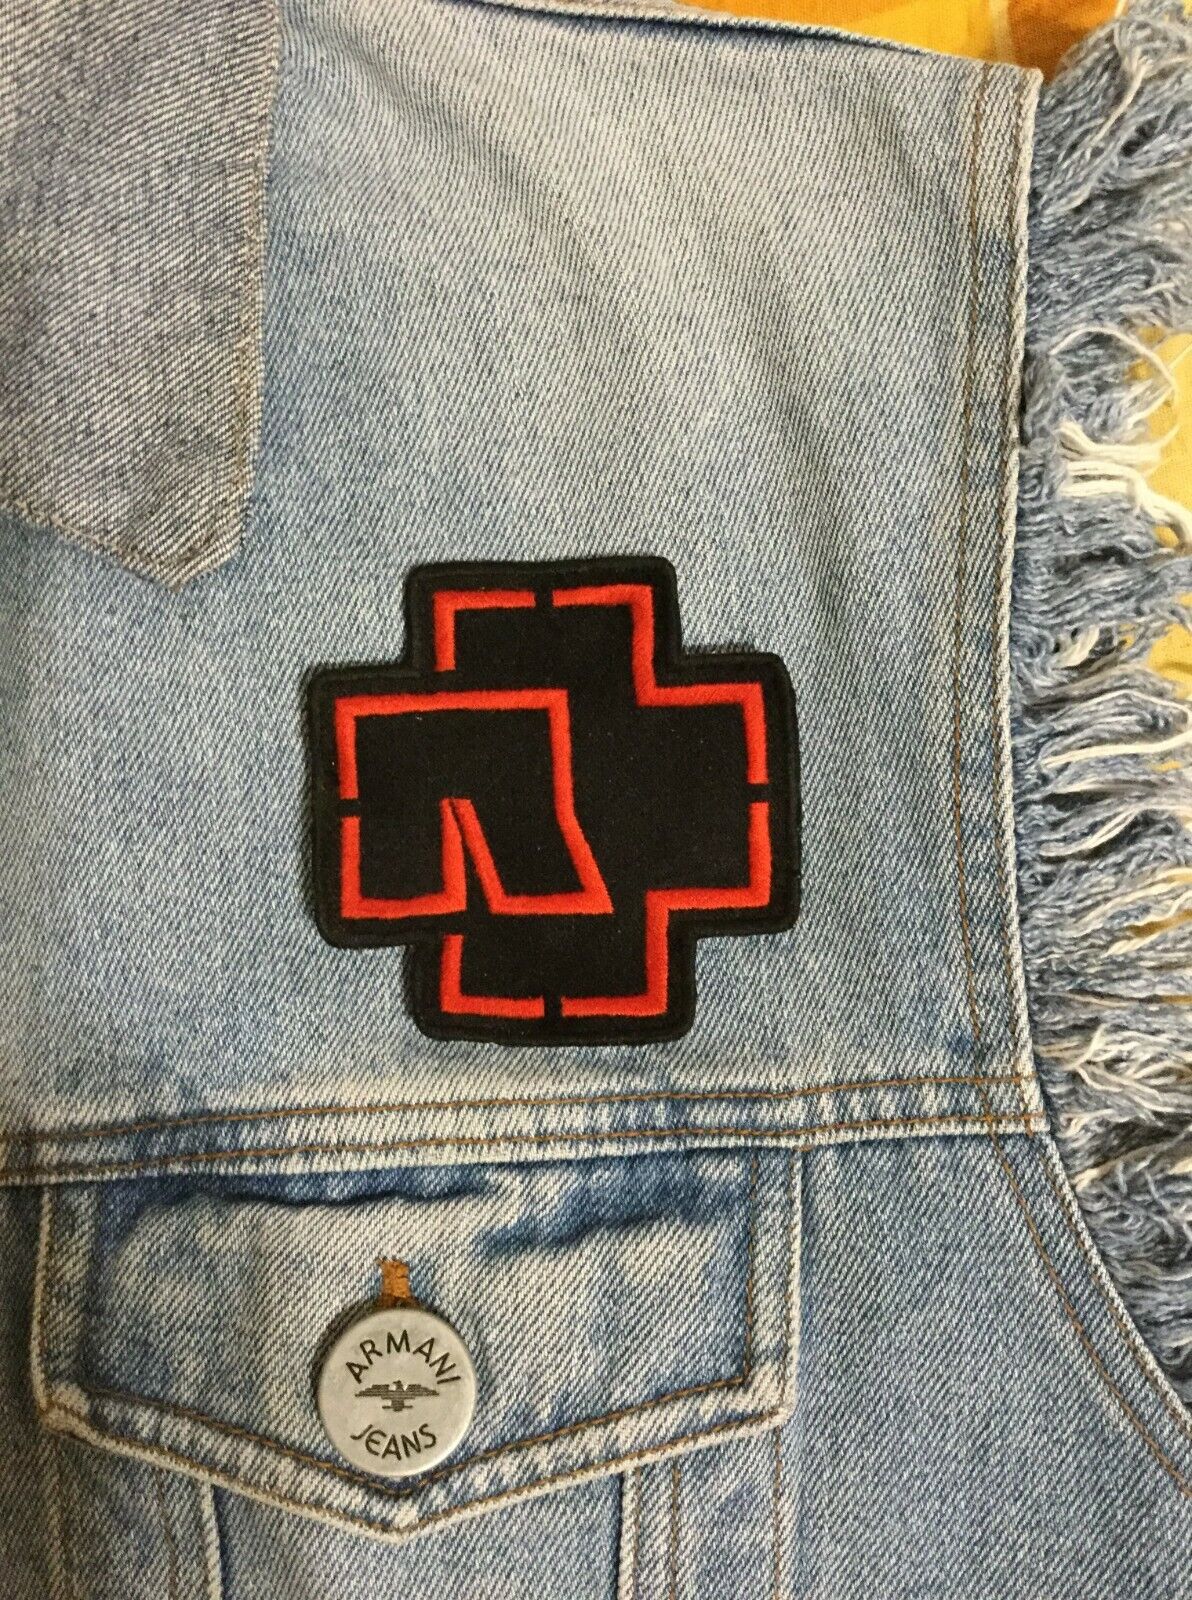 Rammstein cross iron on embroidery patch